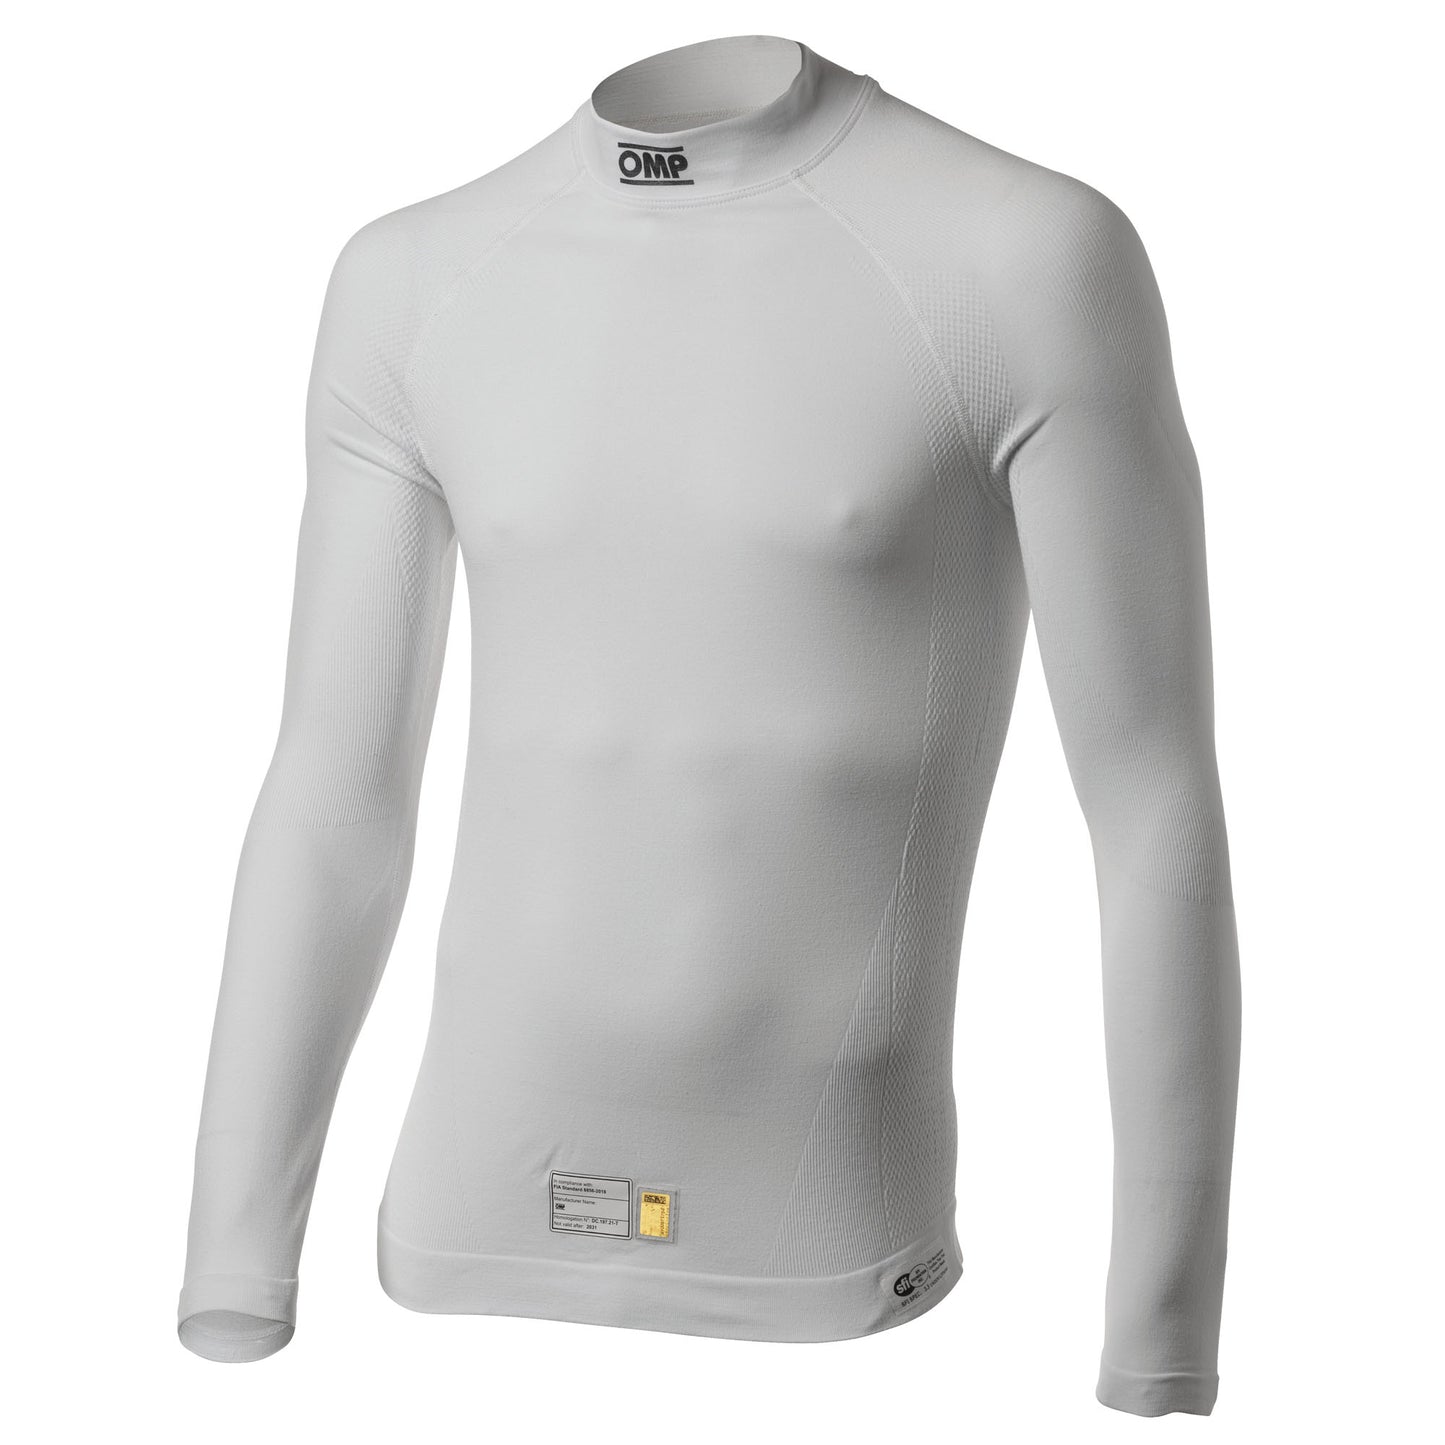 OMP One Evo Top Fireproof Underwear Base Layer FIA 8856-2018 Approved Race Rally